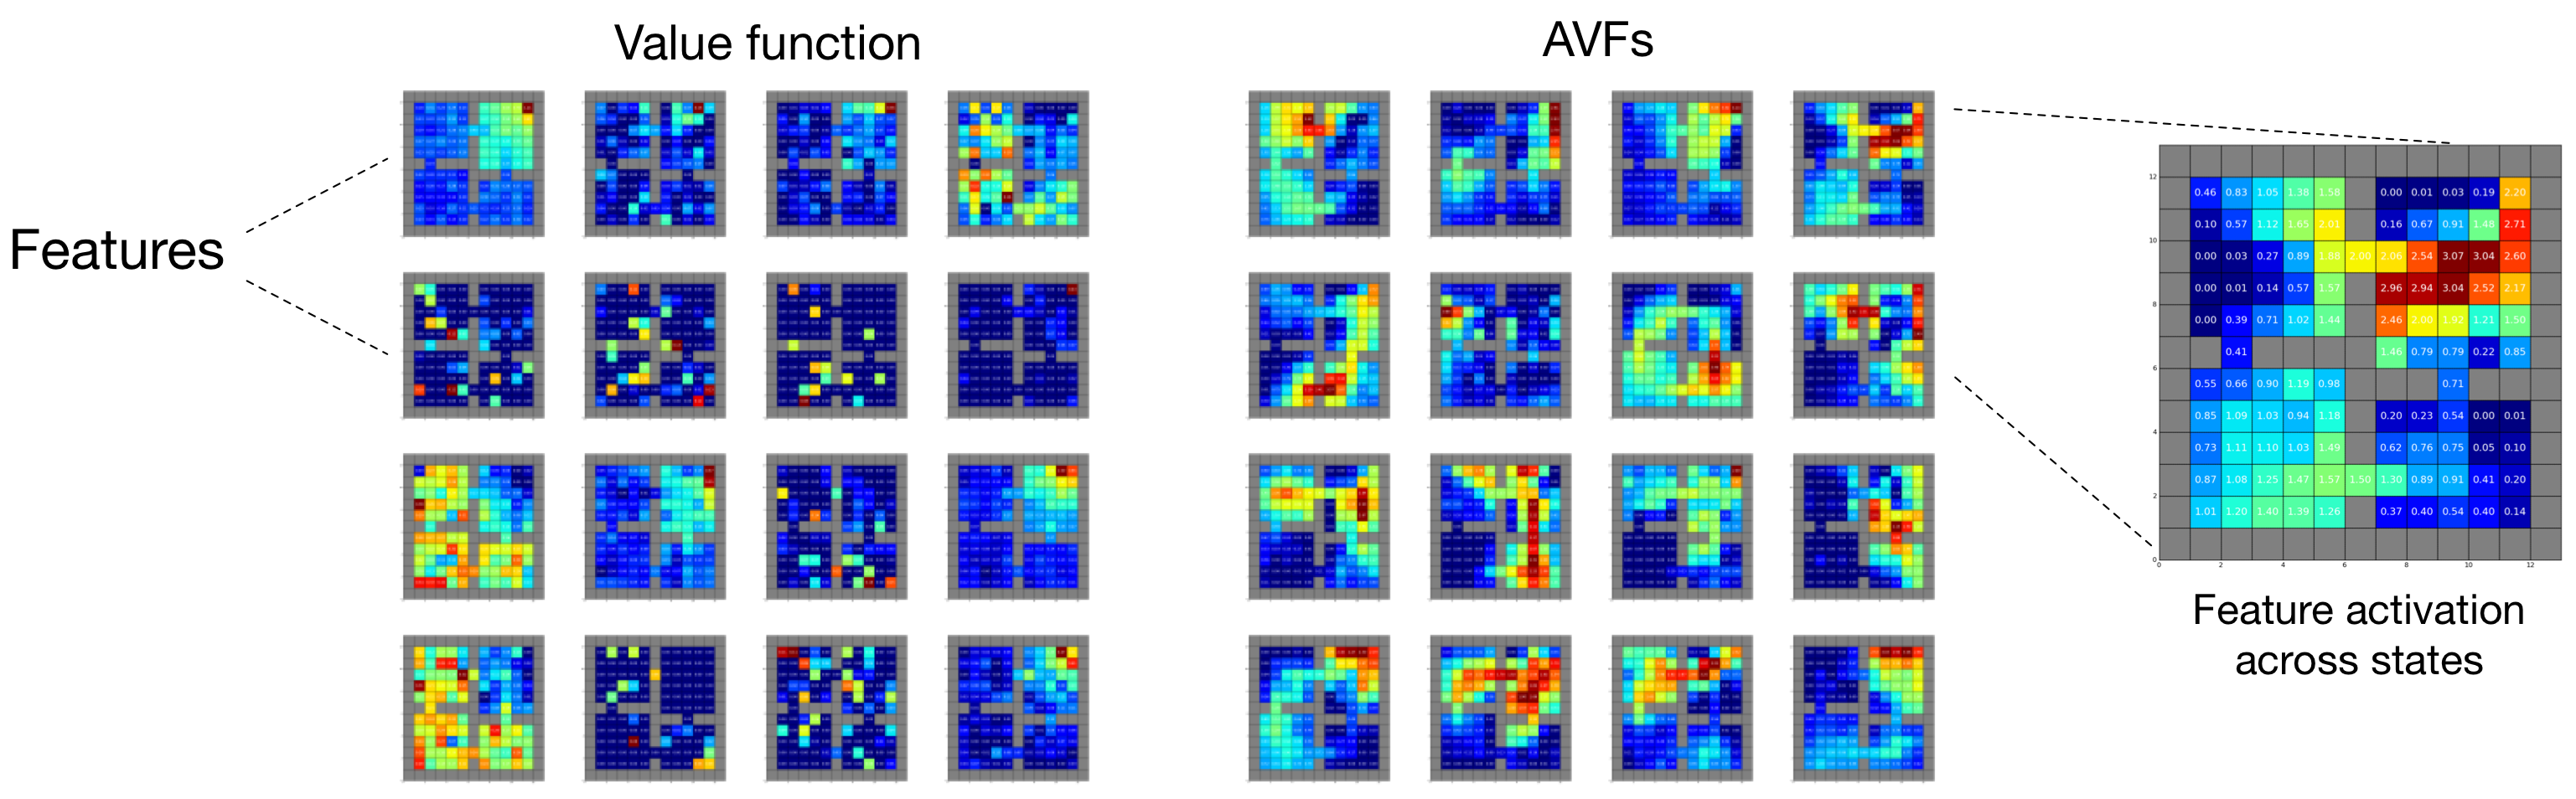 Looking into the representations leaned by the AVF method.